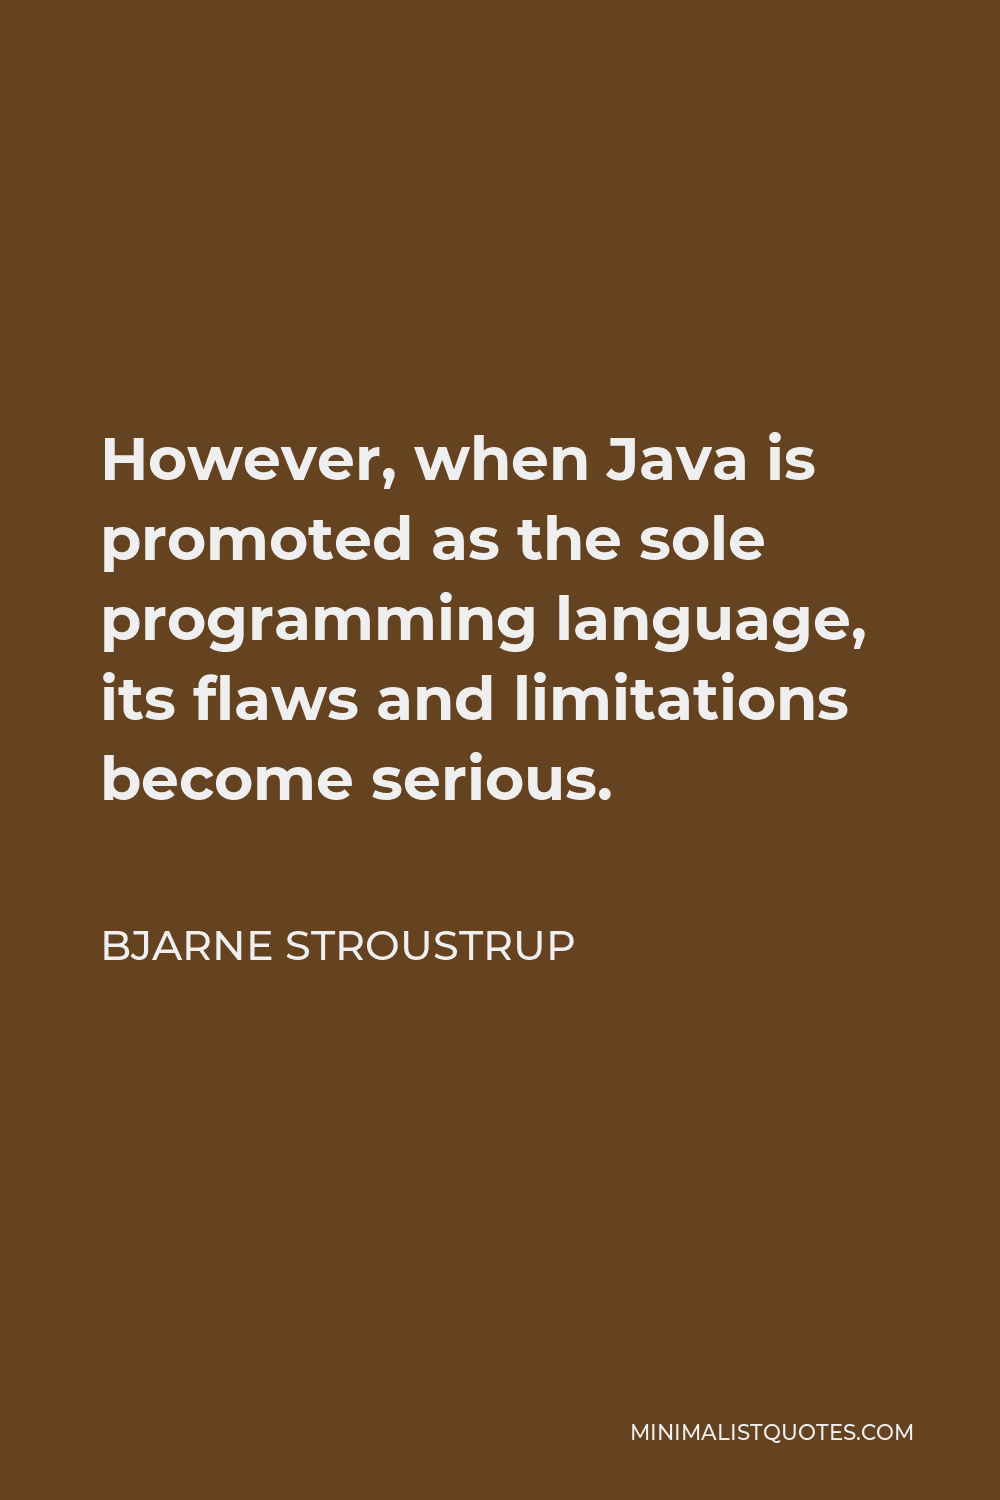 Bjarne Stroustrup Quote - However, when Java is promoted as the sole programming language, its flaws and limitations become serious.